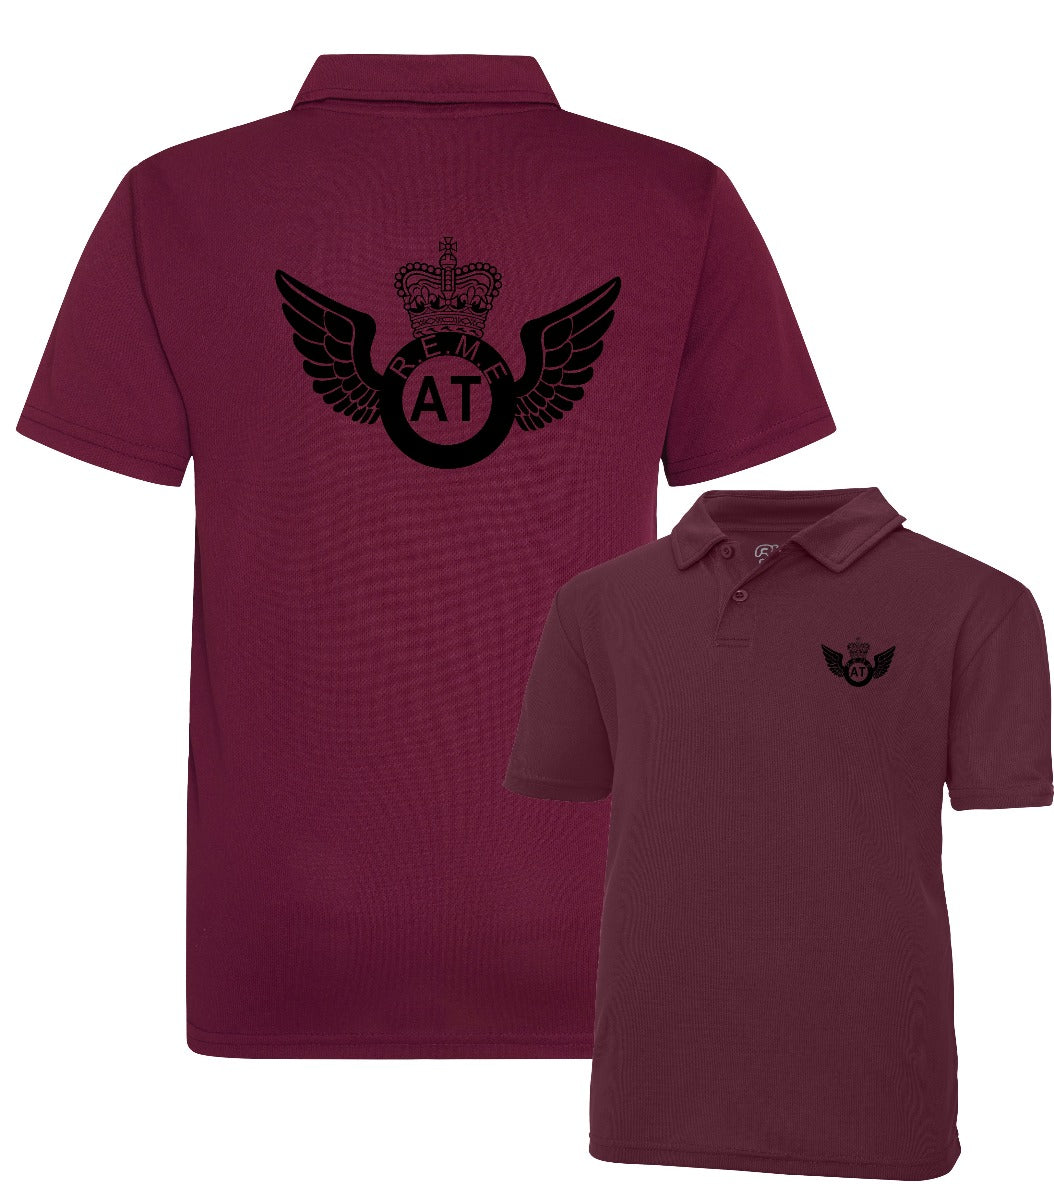 Double Printed AT Wings Wicking Polo Shirt